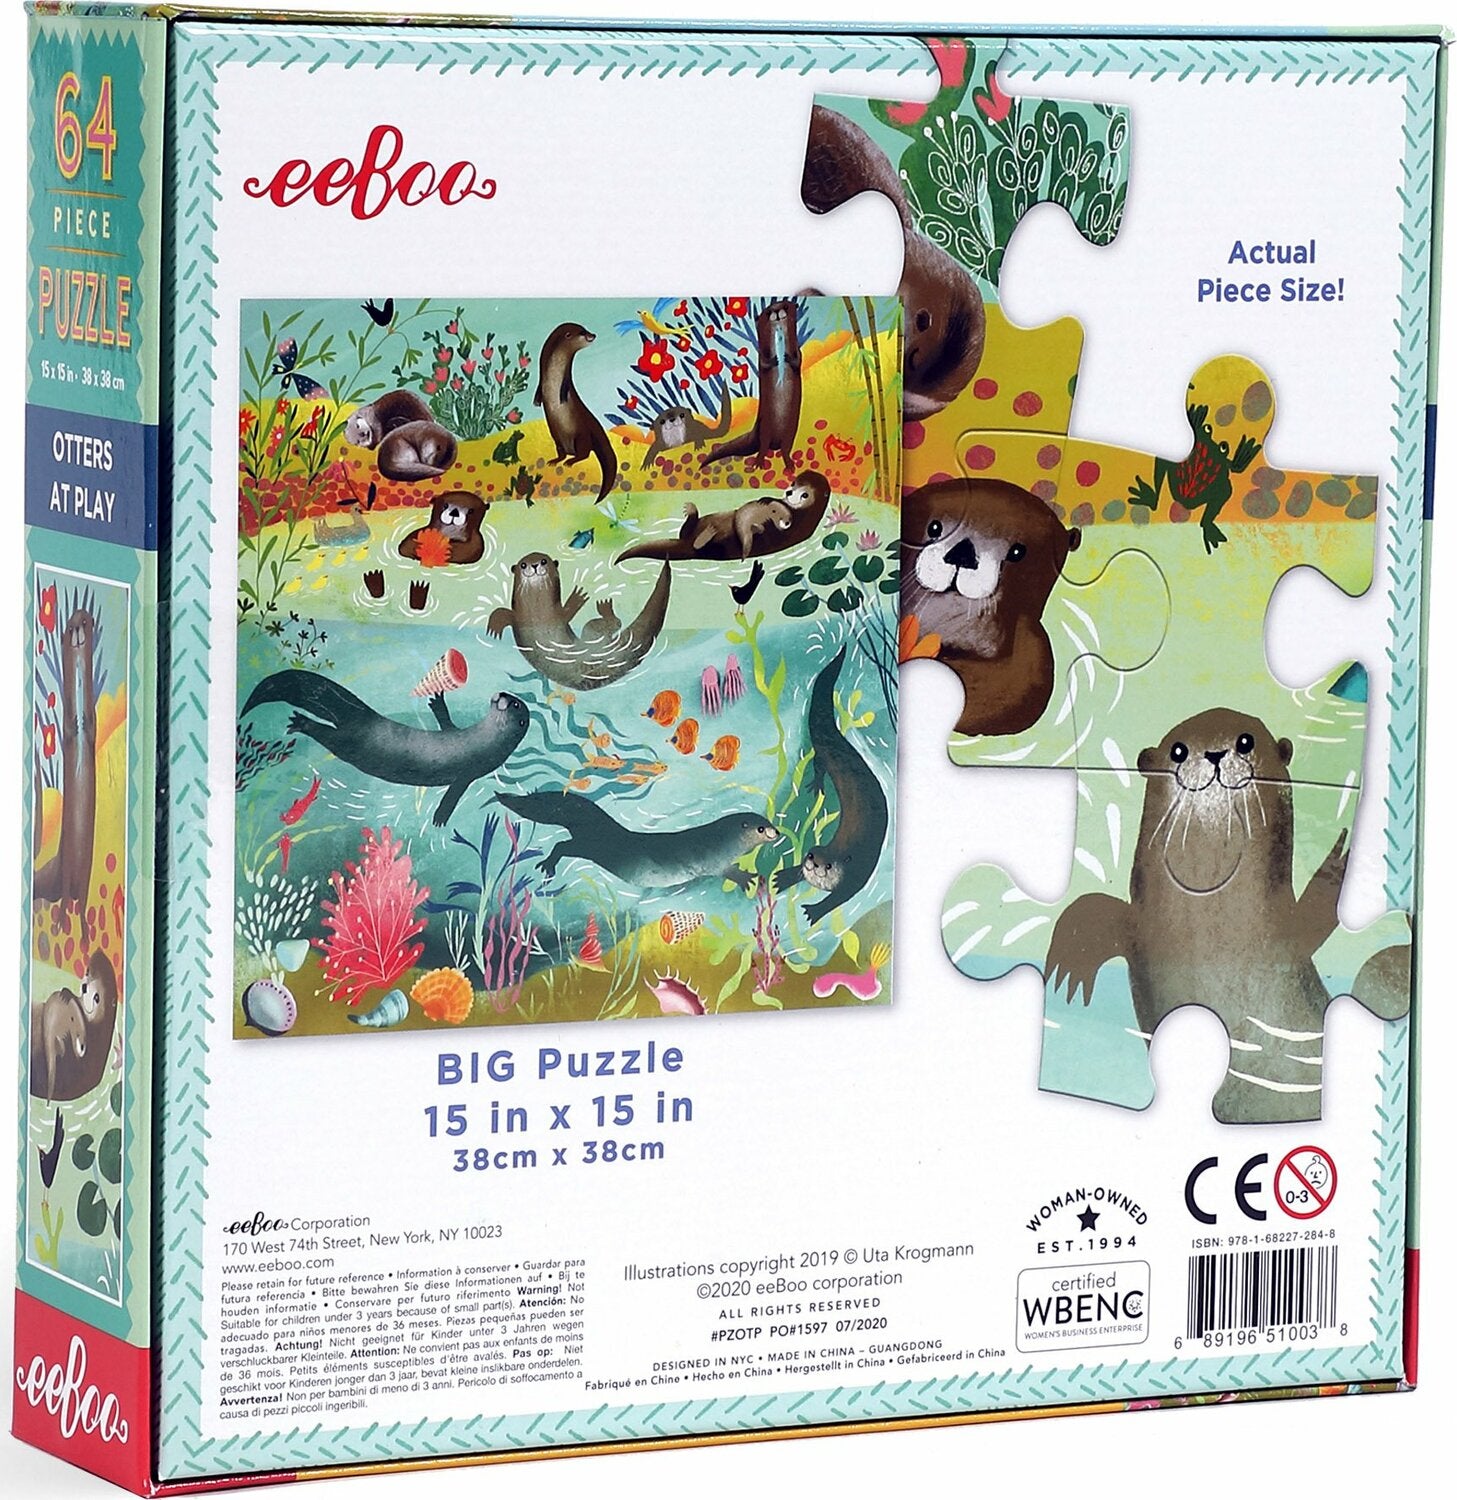 Otters at Play 64 Pc Puzzle